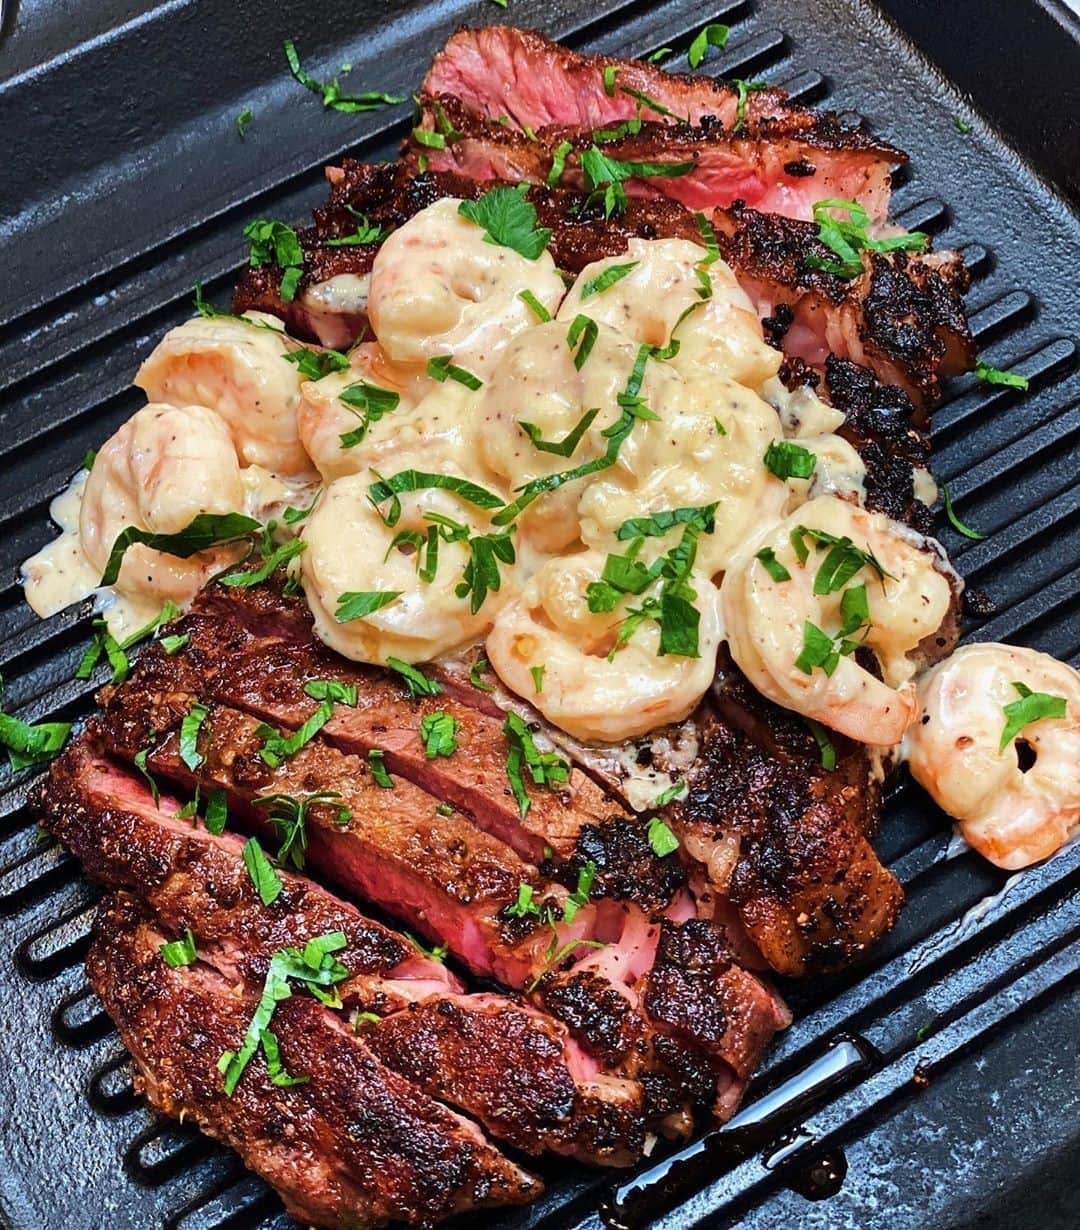 Flavorgod Seasoningsさんのインスタグラム写真 - (Flavorgod SeasoningsInstagram)「STEAK AND CREAMY RANCH SHRIMP ALFREDO⁠ .⁠ Add delicious flavors to your meals!⬇️⁠ Click link in the bio -> @flavorgod  www.flavorgod.com⁠ .⁠ Customer: @aketomyheart⁠ -⁠ Ranch Alfredo ingredients ⁠ -⁠ I garlic clove minced⁠ Shrimp cleaned and deveined⁠ 1/4 cup white wine optional⁠ 2 Tbls butter⁠ Redmond Salt⁠ Pepper⁠ 1 tsp or more Ranch Seasoning by Flavor God⁠ 1/2 cup or more cup heavy cream.⁠ .⁠ .⁠ In a nonstick pan melt the butter and sauté garlic and shrimp. As the shrimp starts to cook, pour in the wine and reduce to half. Season with salt and pepper, then add the cream. As the cream starts to thicken add the Ranch seasoning and adjust accordingly. Serve over the steak and enjoy! .⁠ -⁠ Flavor God Seasonings are:⁠ ✅ZERO CALORIES PER SERVING⁠ ✅MADE FRESH⁠ ✅MADE LOCALLY IN US⁠ ✅FREE GIFTS AT CHECKOUT⁠ ✅GLUTEN FREE⁠ ✅#PALEO & #KETO FRIENDLY⁠ -⁠ #food #foodie #flavorgod #seasonings #glutenfree #mealprep #seasonings #breakfast #lunch #dinner #yummy #delicious #foodporn」1月30日 11時01分 - flavorgod